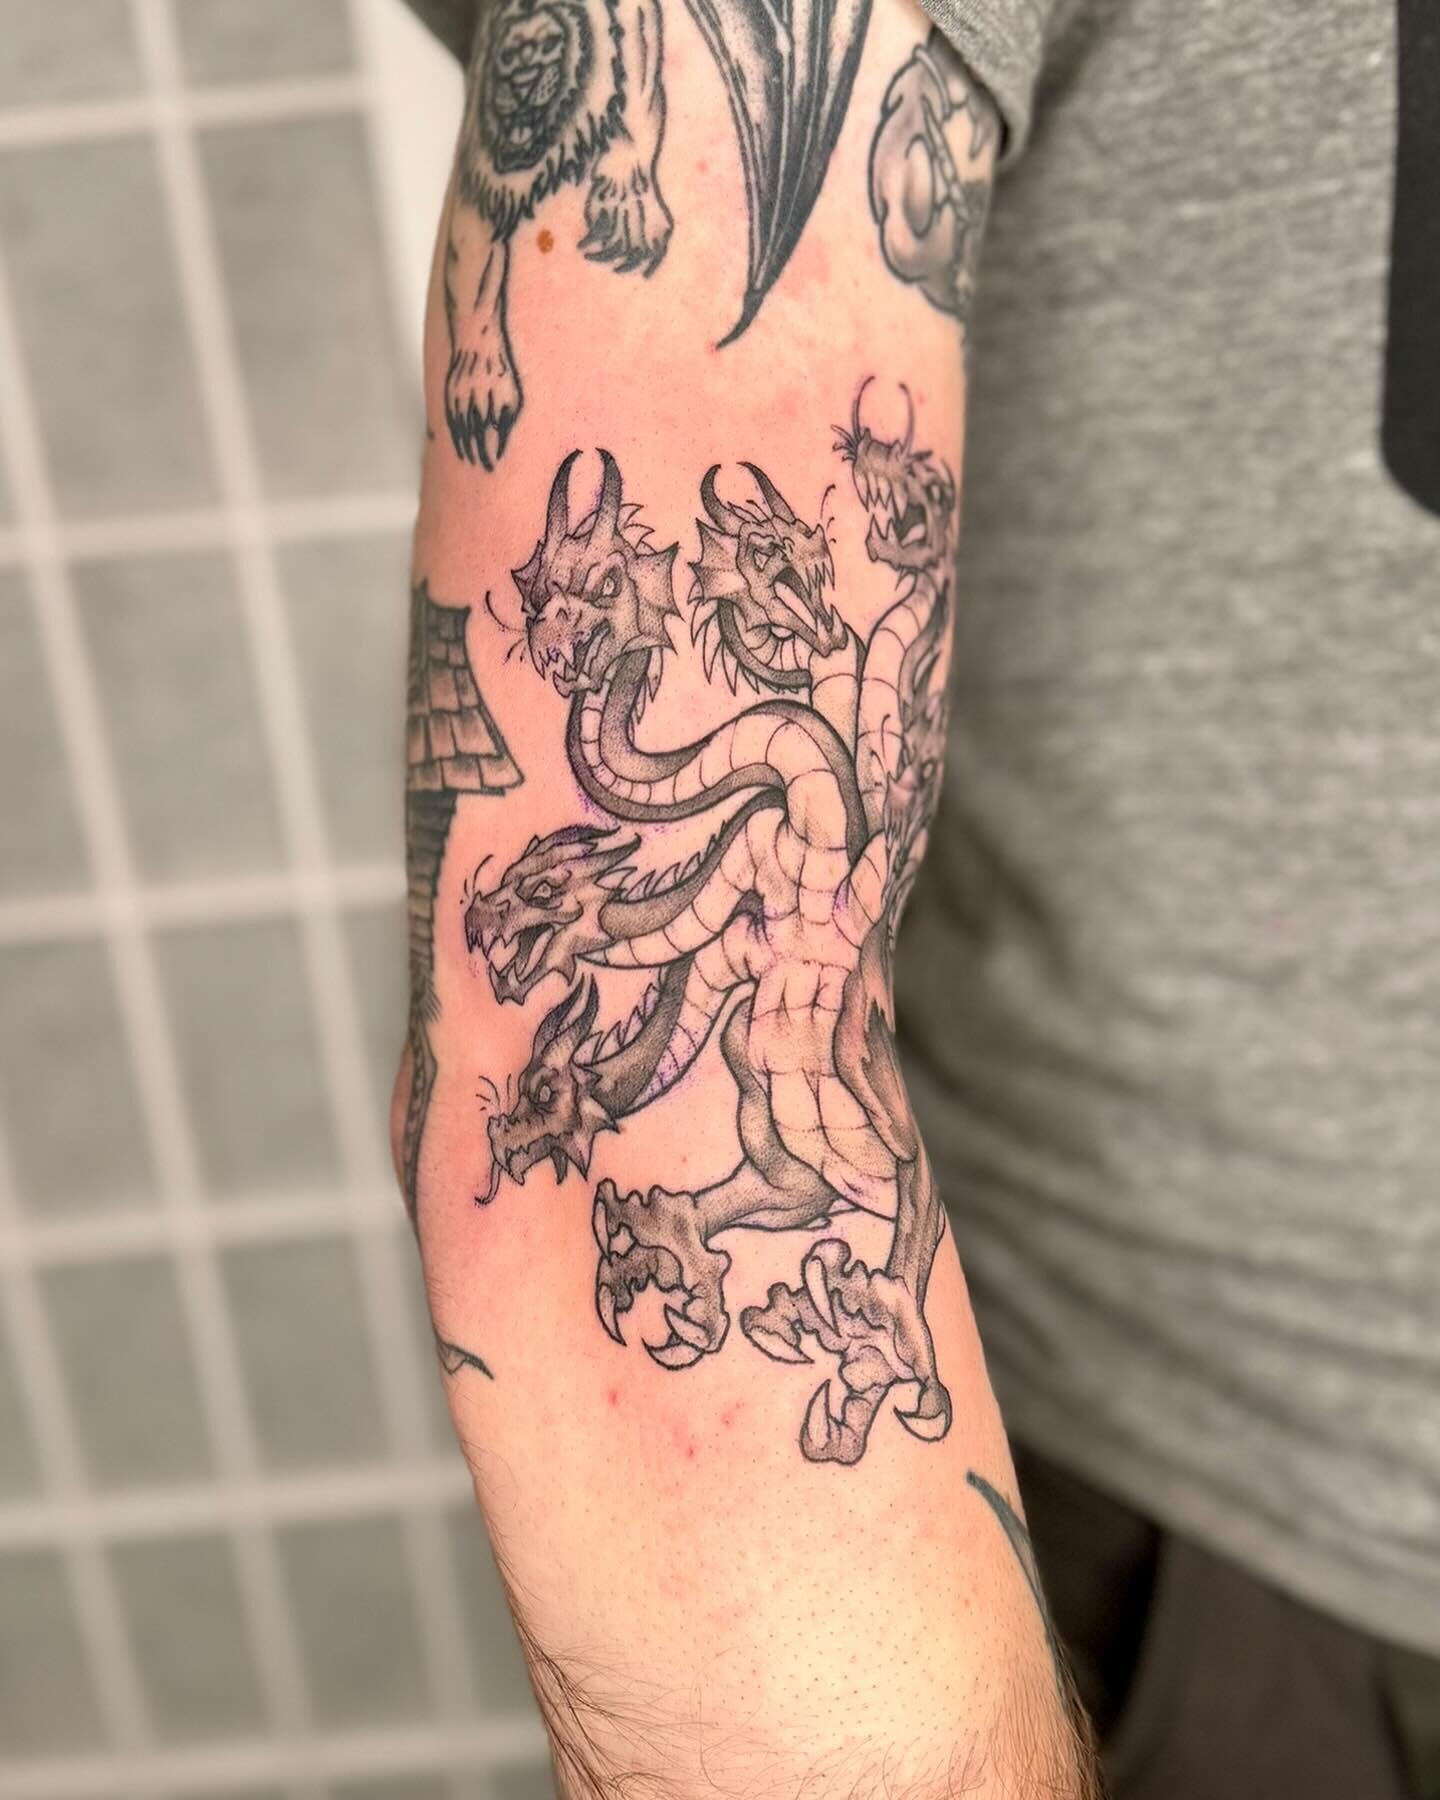 Hydra Filler for Monster Sleeve🐉🐉🐉
Can I just say what an absolute joy it was to make this super fun space filler! Thank you Landon for your trust during this process. Such a good sesh with great vibes, love my job! 

#pdxtattoo #portlandtattoo #f